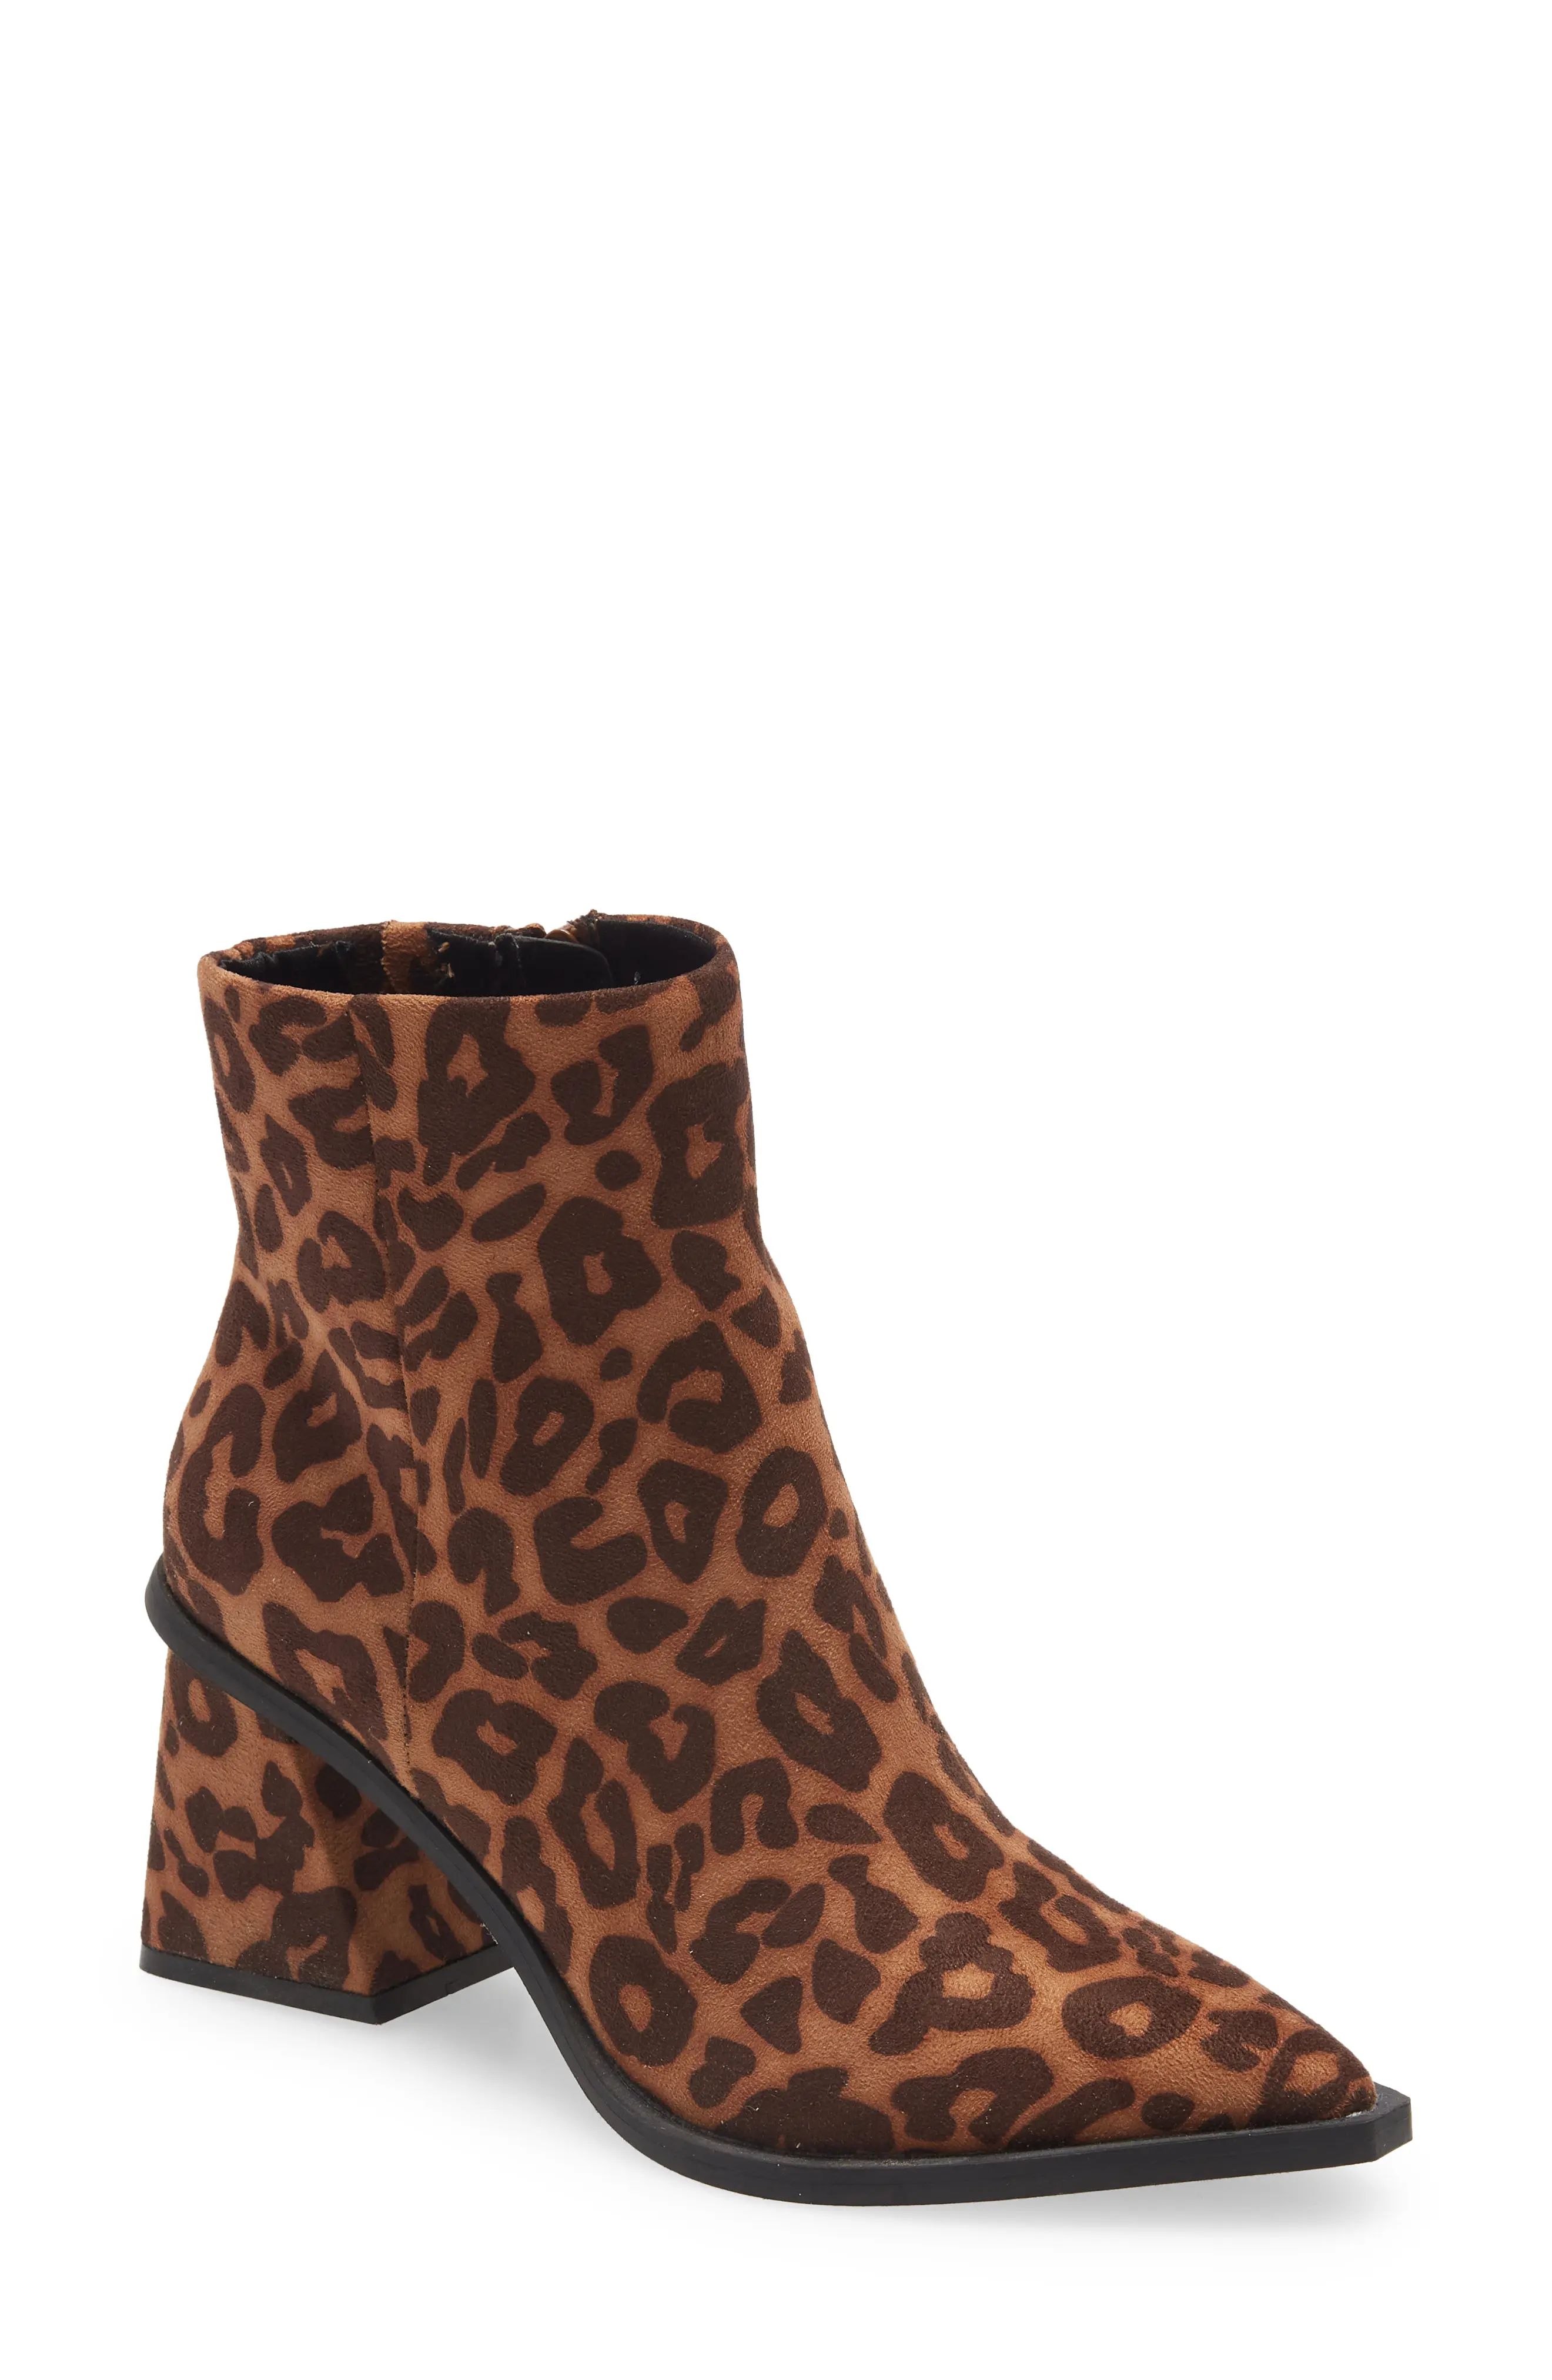 BP. Loren Pointed Toe Bootie, Size 9 in Tan Leopard at Nordstrom | Nordstrom